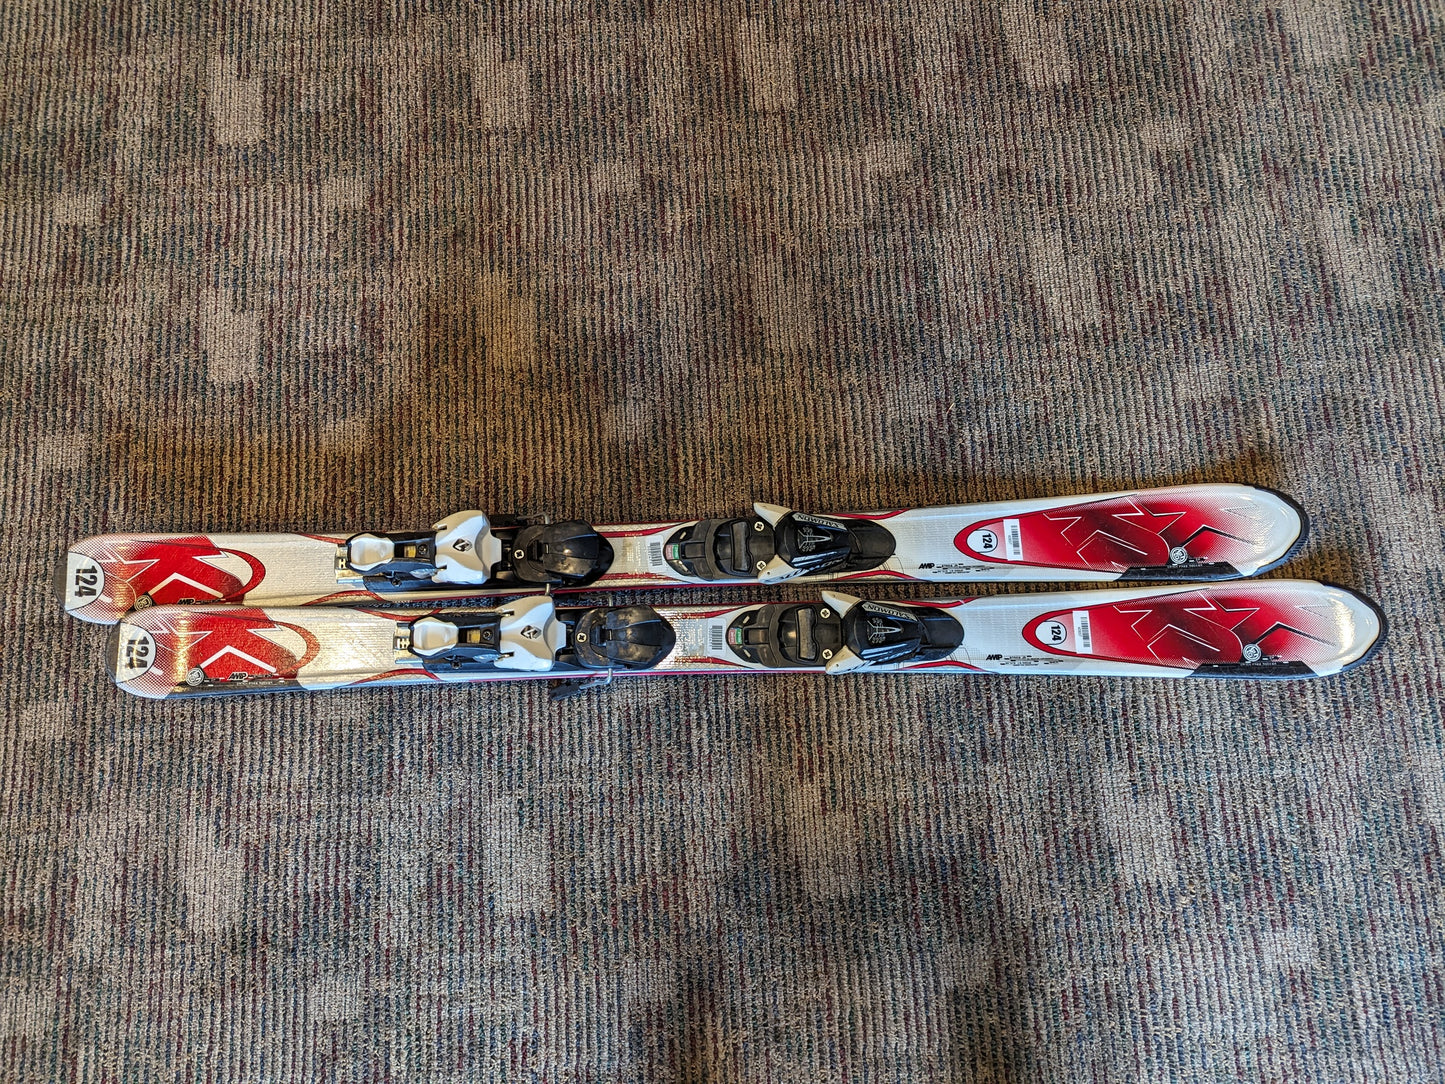 K2 Amp Strike Jr Skis w/Salomon Bindings Size 124 Cm Color Red Condition Used